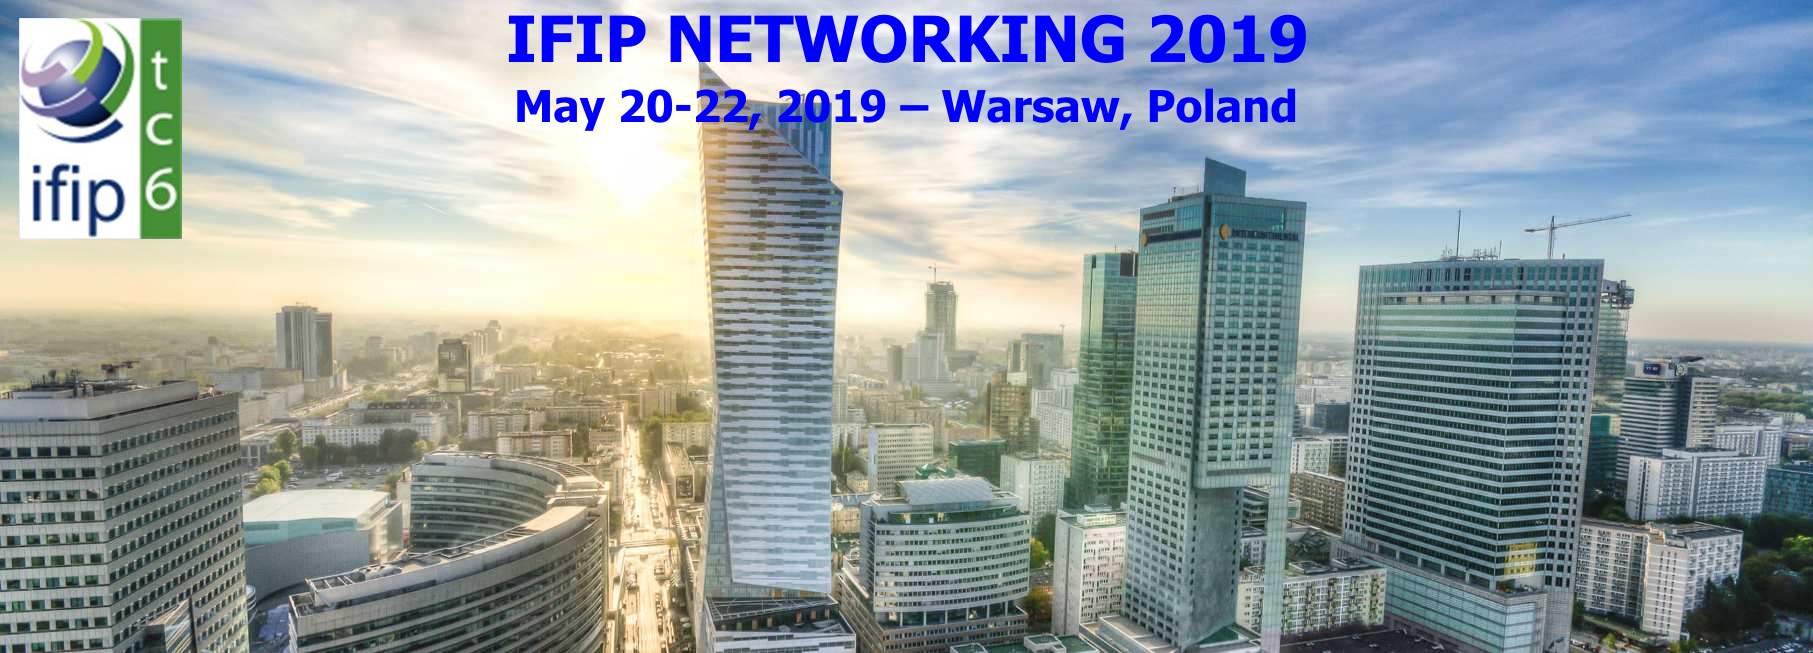 Networking 2019